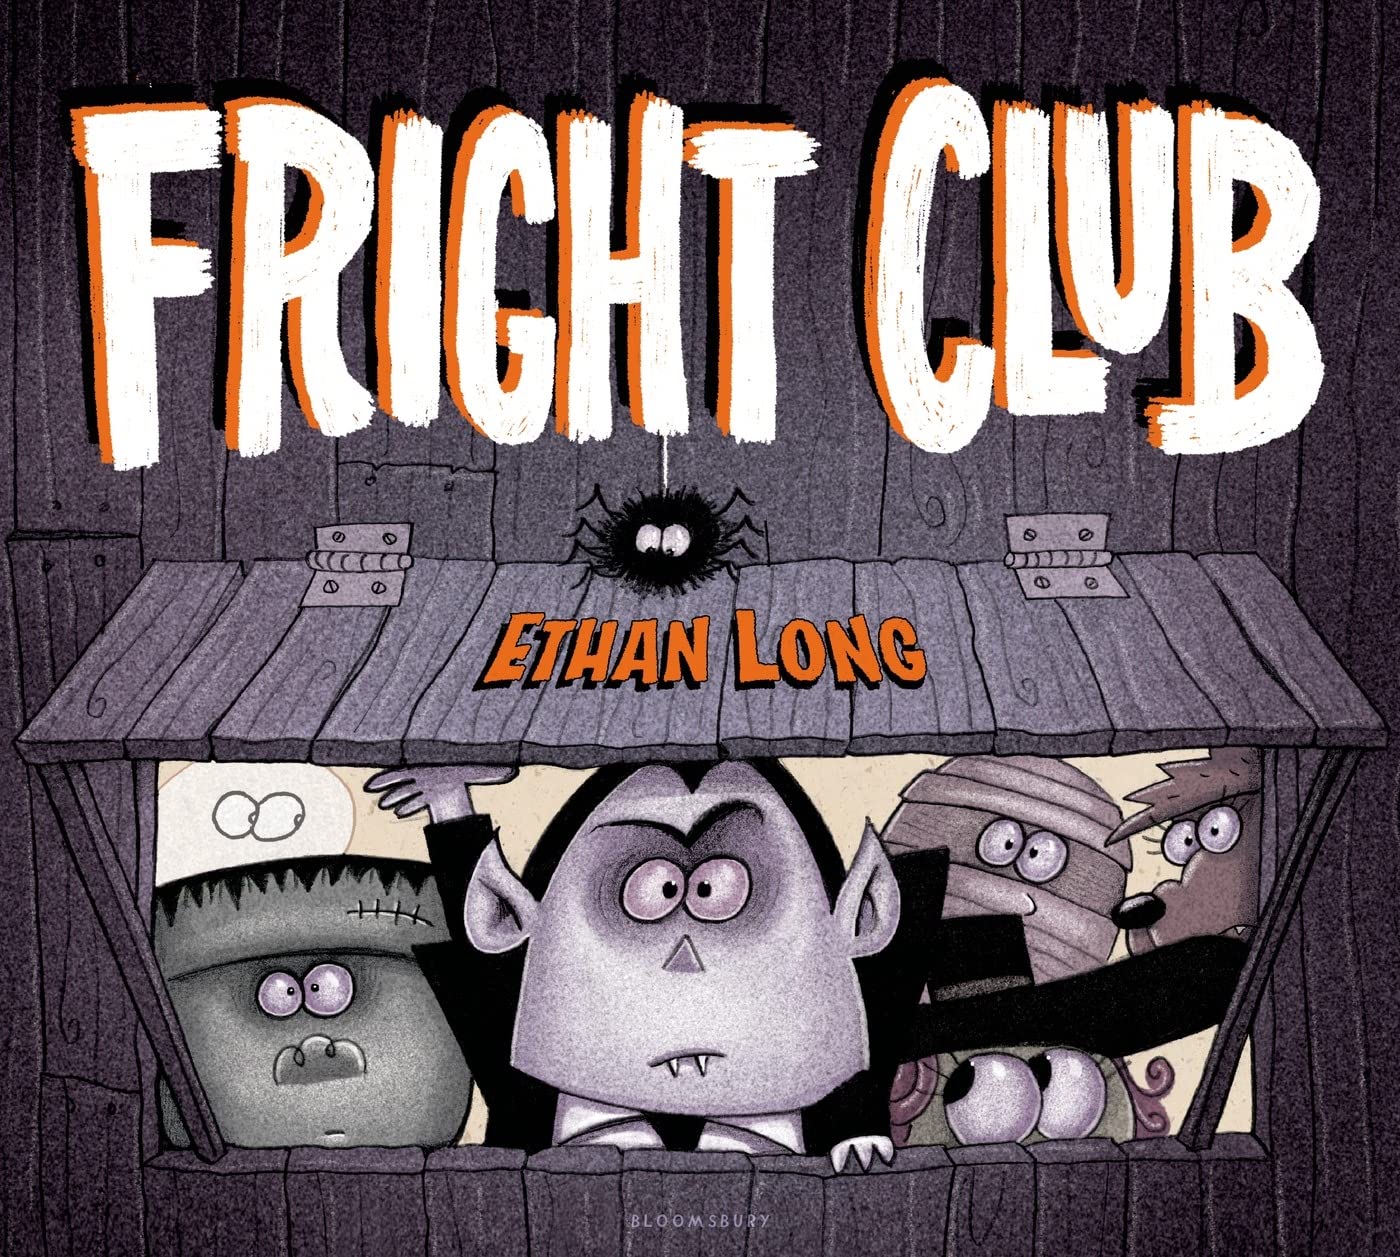 speech and language teaching concepts for Fright Club in speech therapy